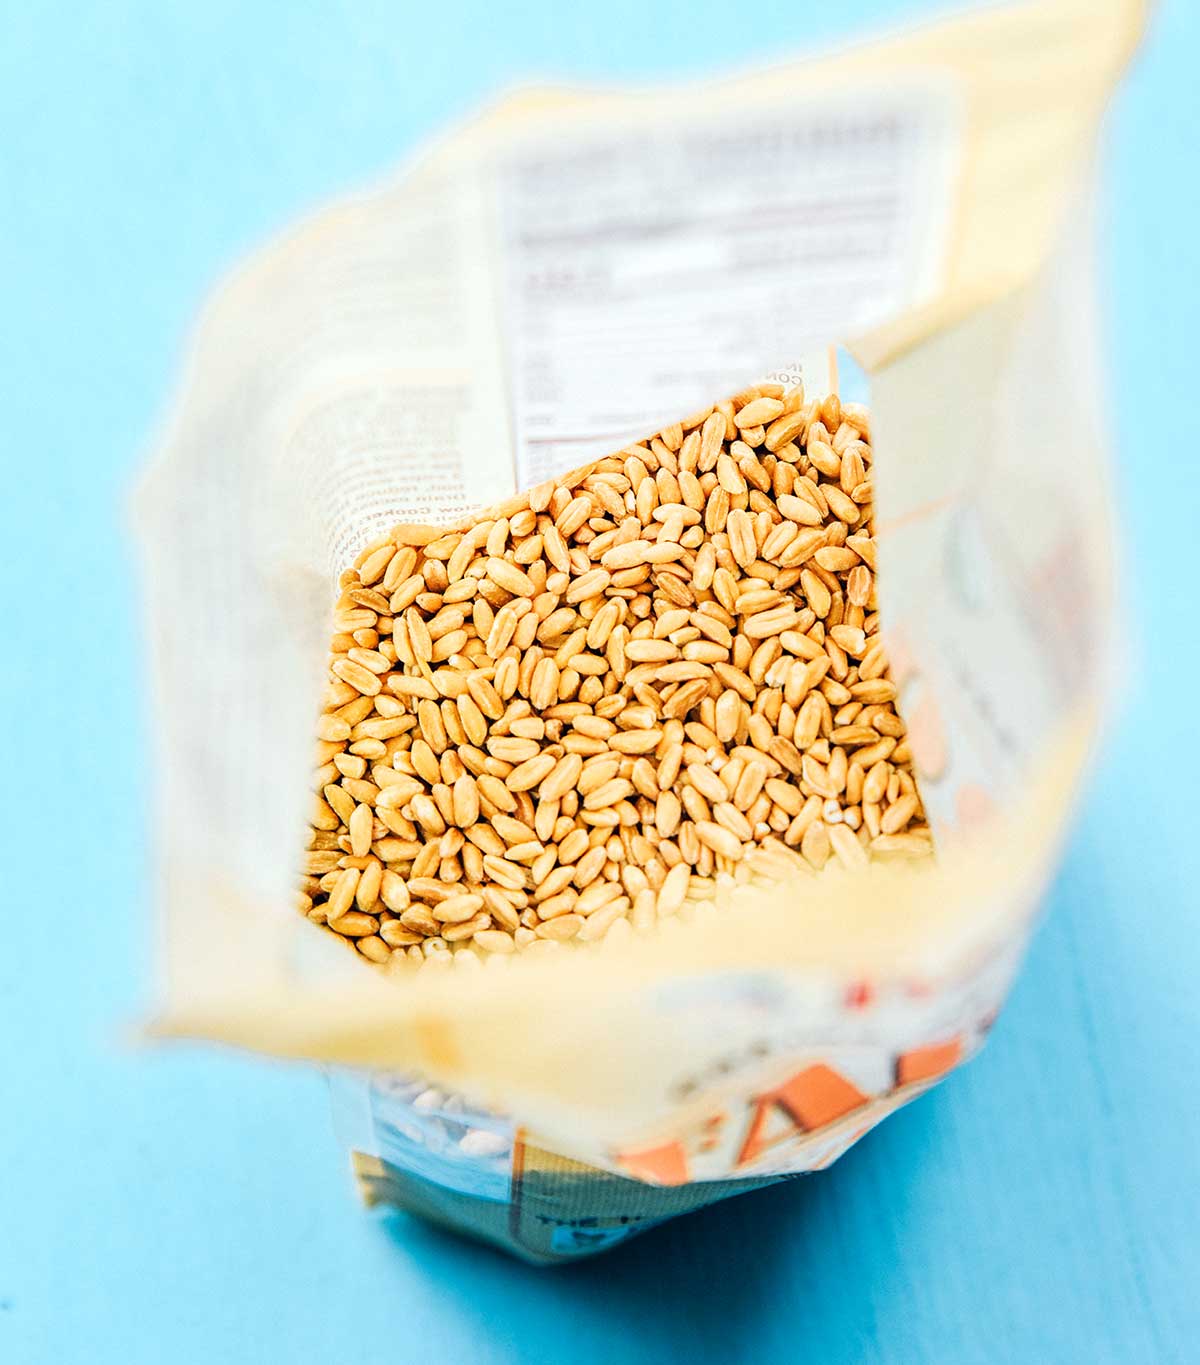 A look inside a bag of uncooked farro grains